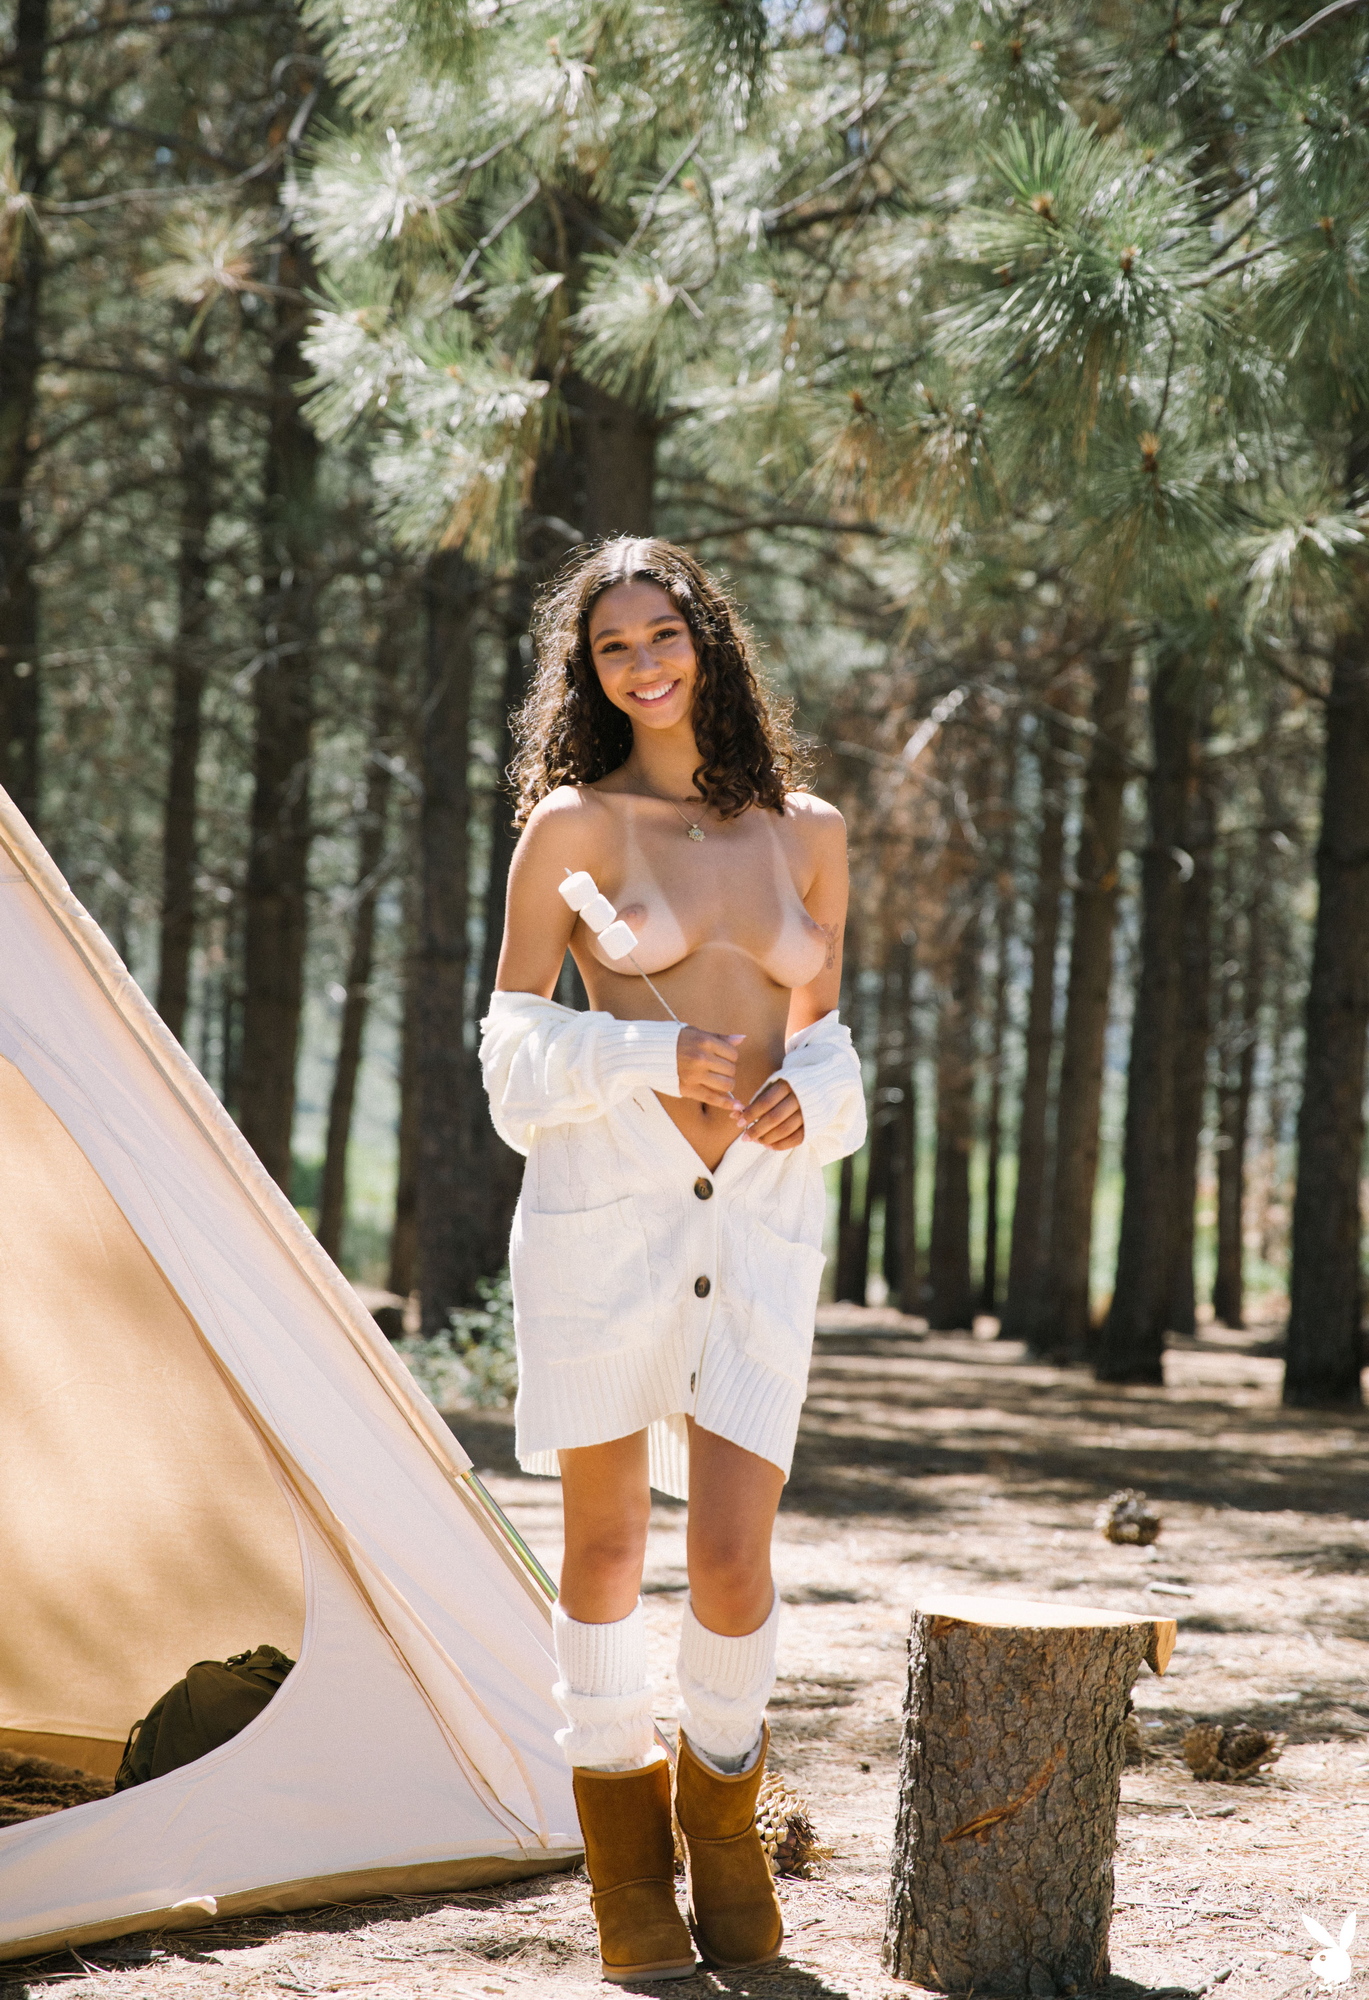 maia-serena-tranquil-setting-naked-brunette-tent-woods-playboy-17